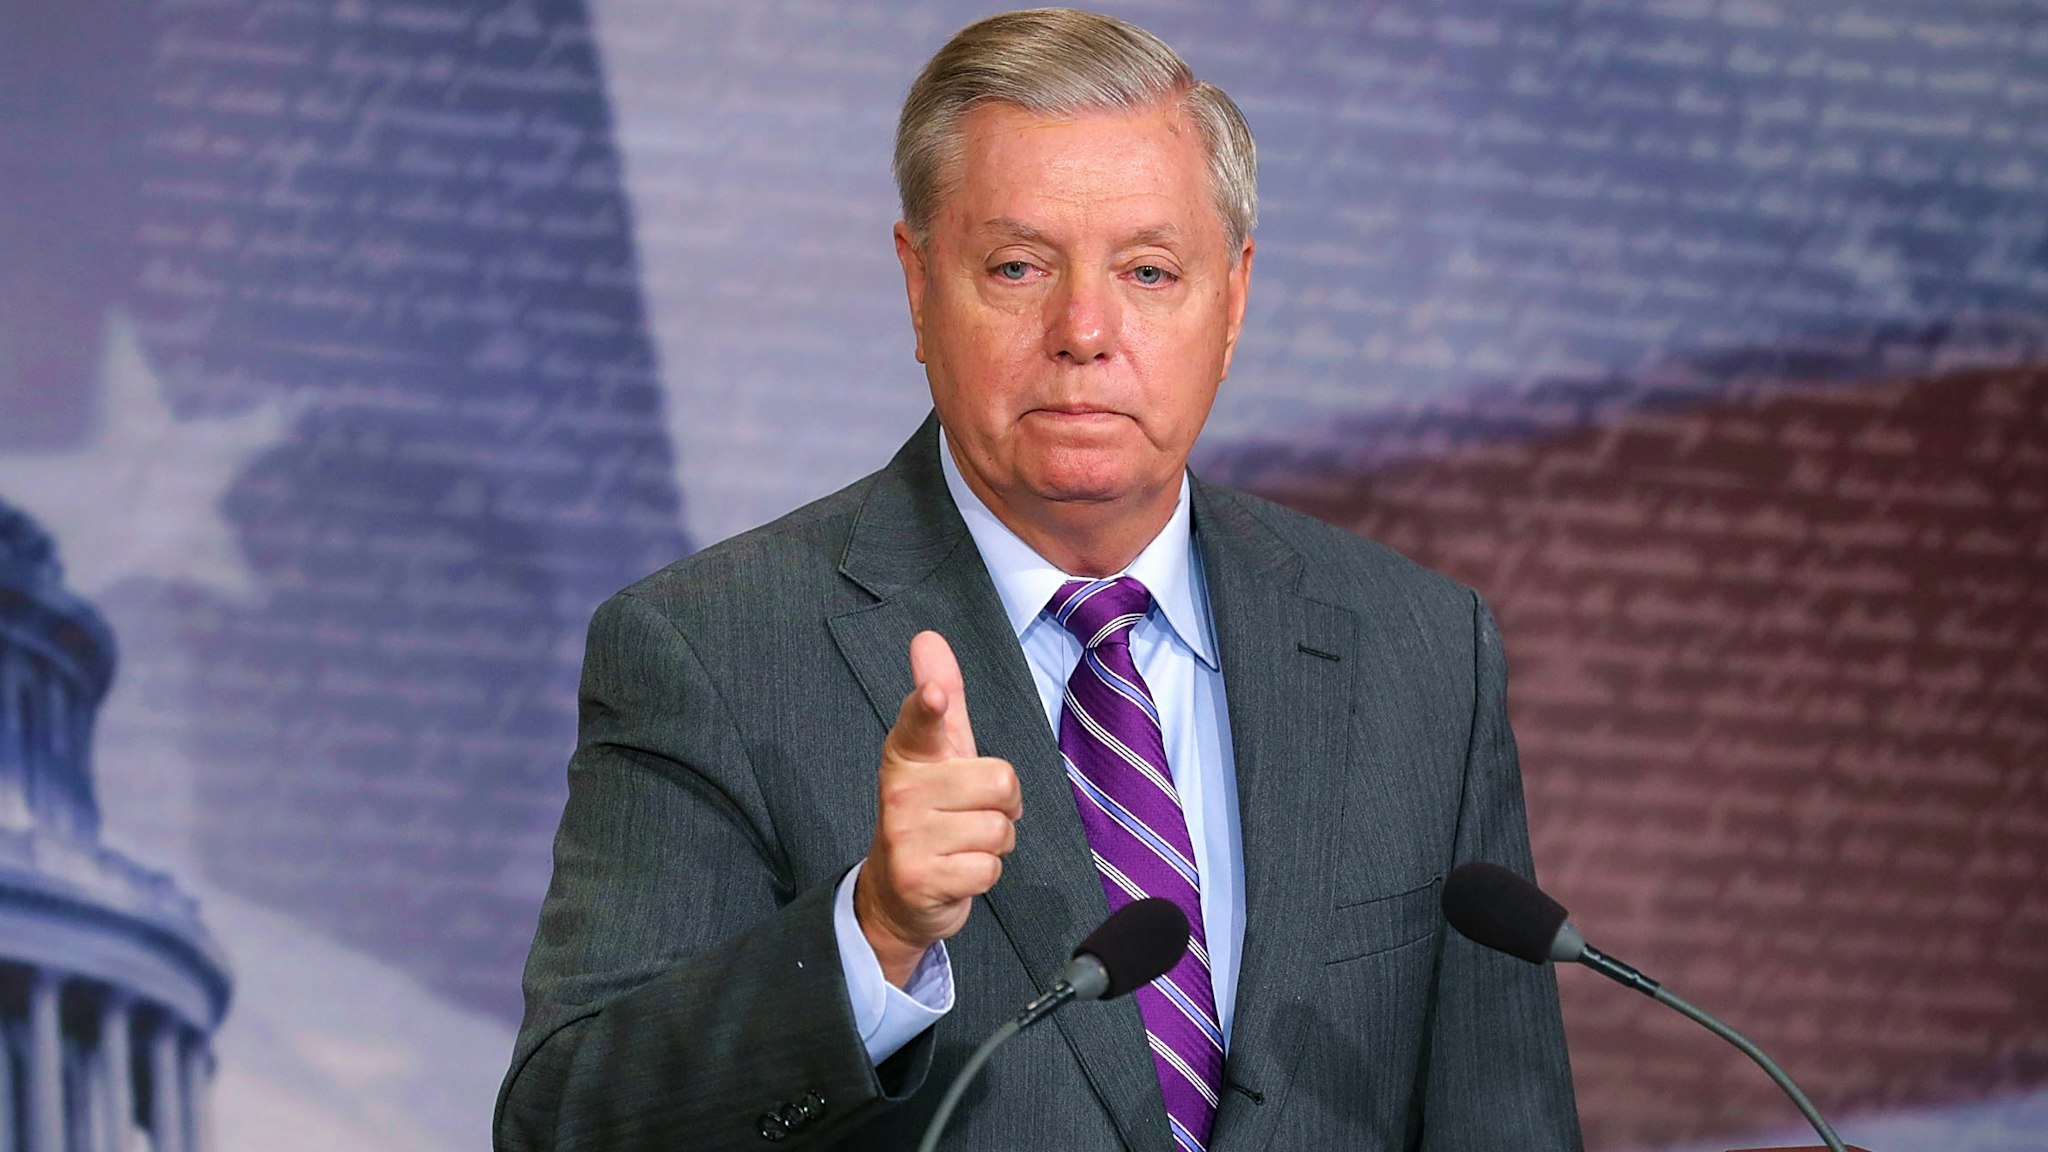 WASHINGTON, DC - NOVEMBER 01: Sen. Lindsey Graham (R-SC) talks to reporters about the suspect in a vehicle attack in Manhattan during a news conference at the U.S. Capitol November 1, 2017 in Washington, DC. Graham told reporters he talked with President Donald Trump about Graham's belief that the suspect, Sayfullo Saipov, should be designated an unlawful enemy combatant.